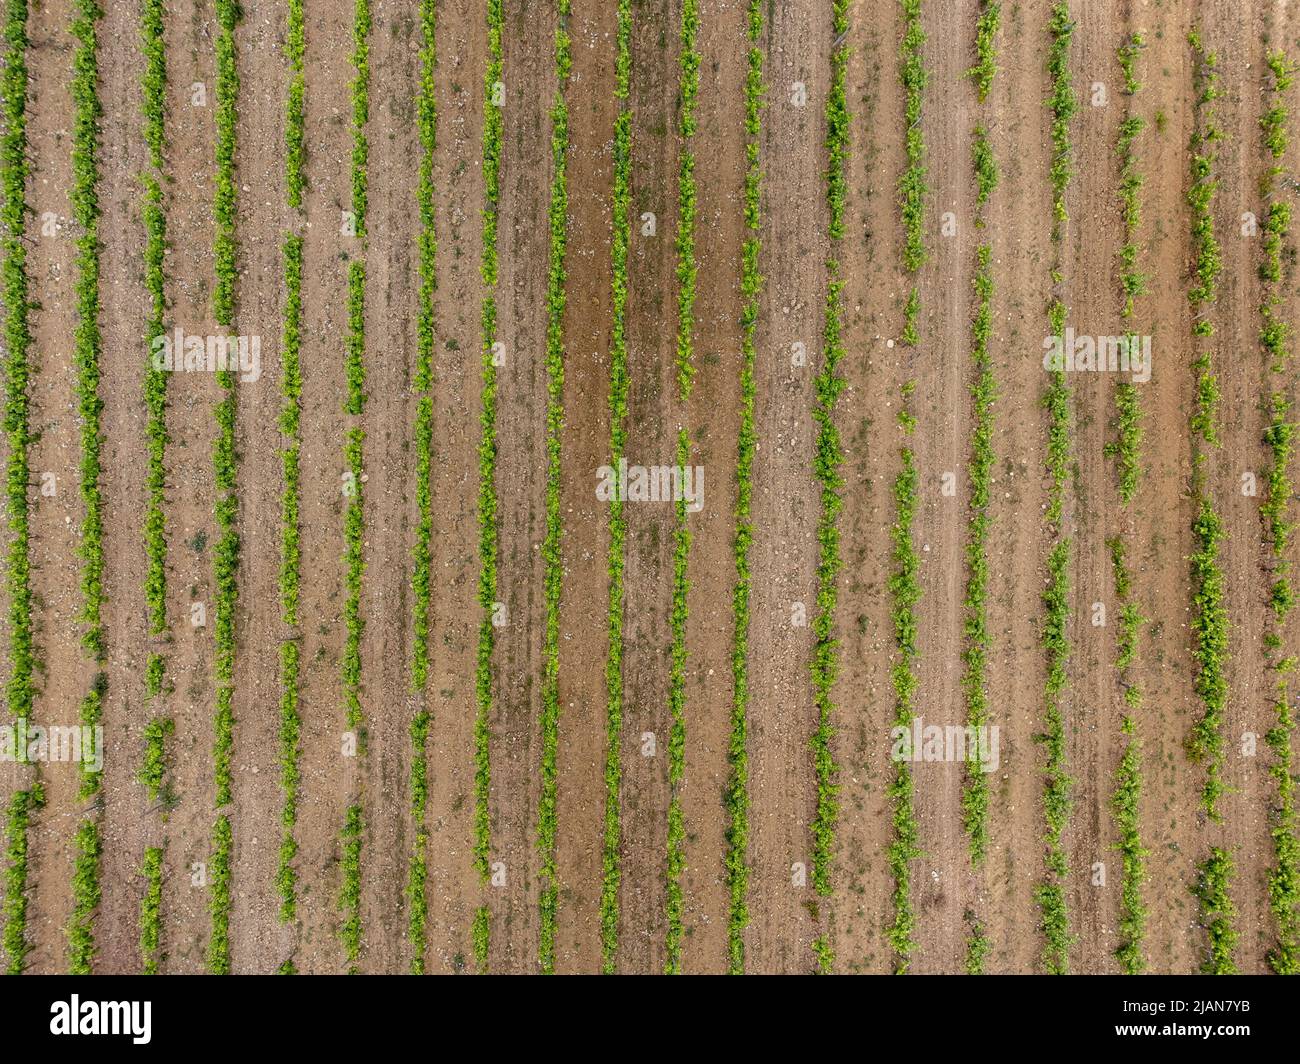 Aerial view of a vineyard Stock Photo